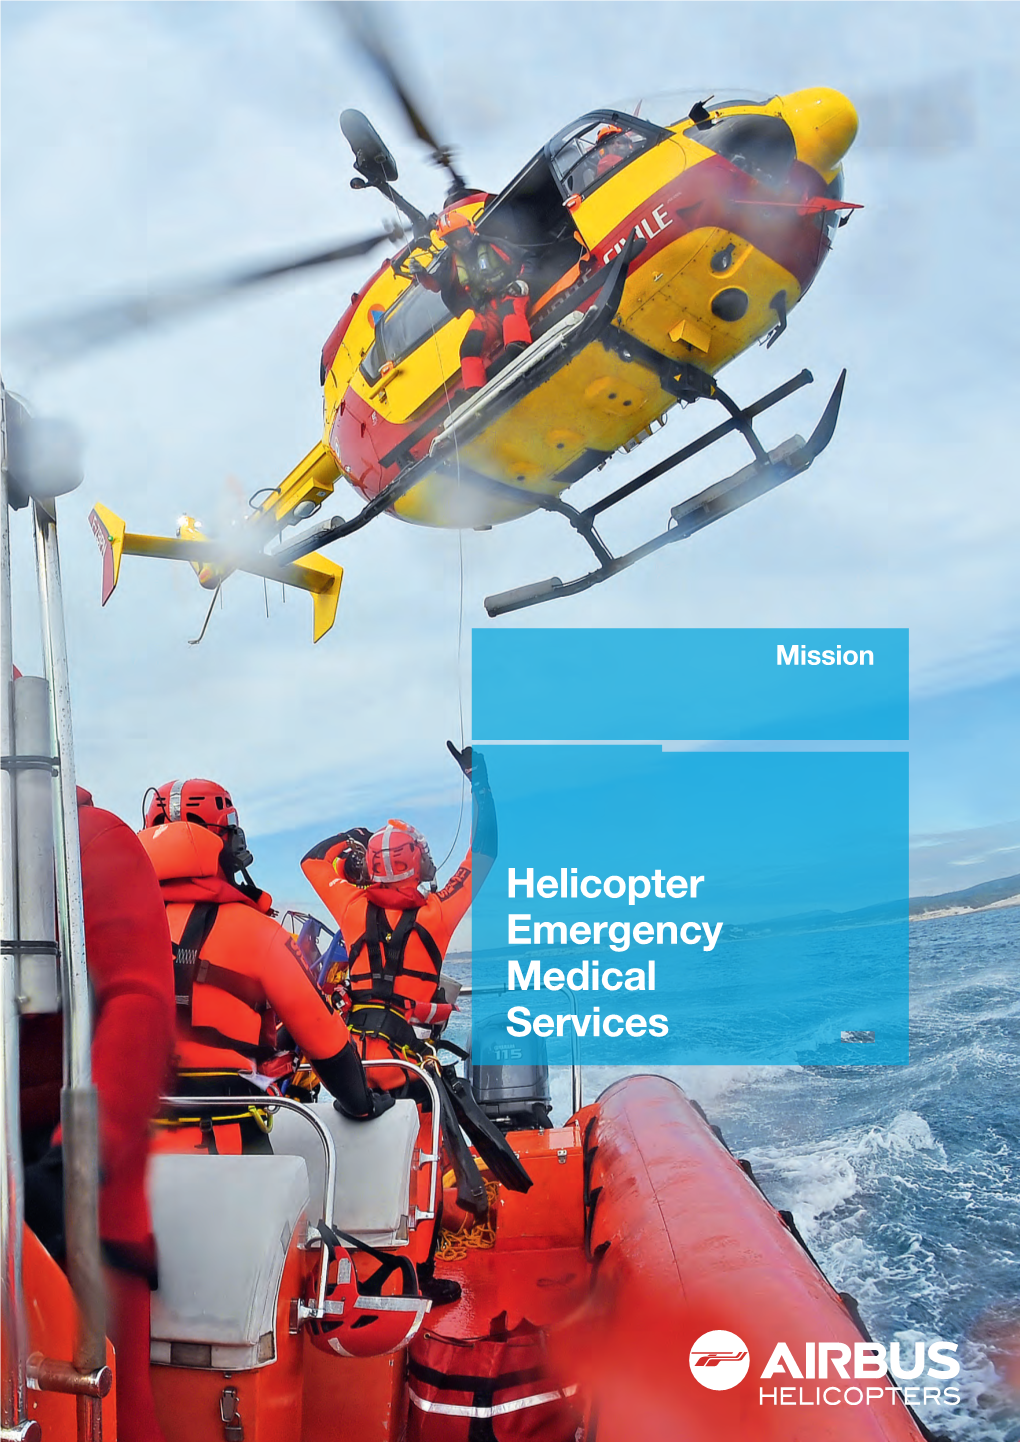 Helicopter Emergency Medical Services